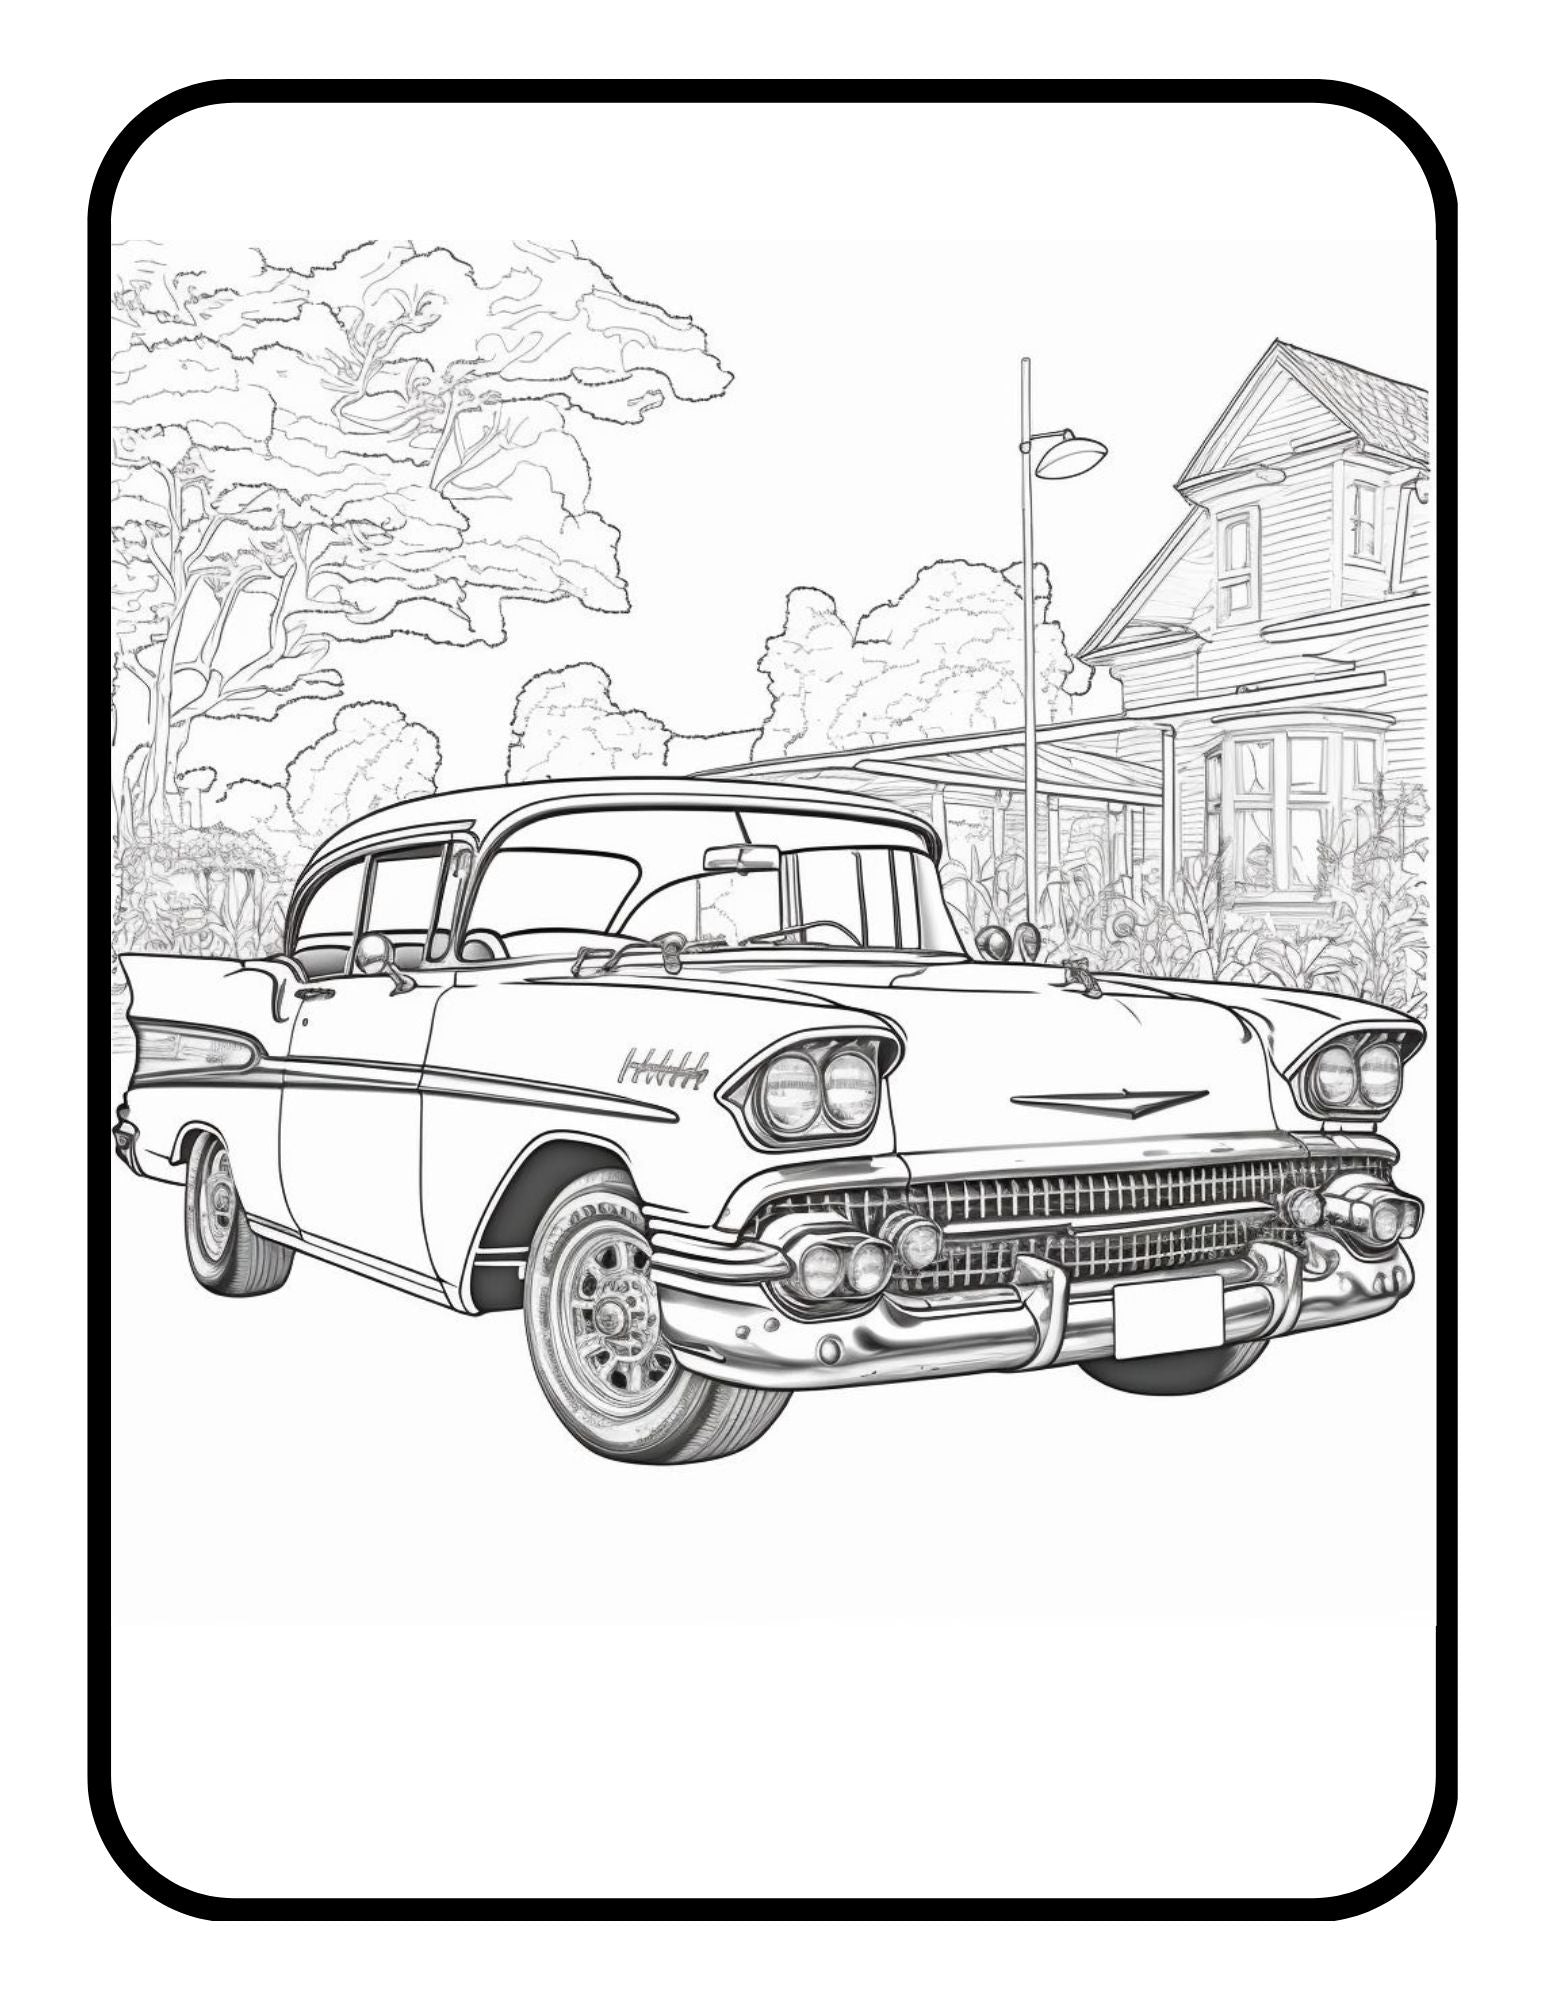 Vintage classic old enthusiast car coloring book exotic race car for m â mode art design